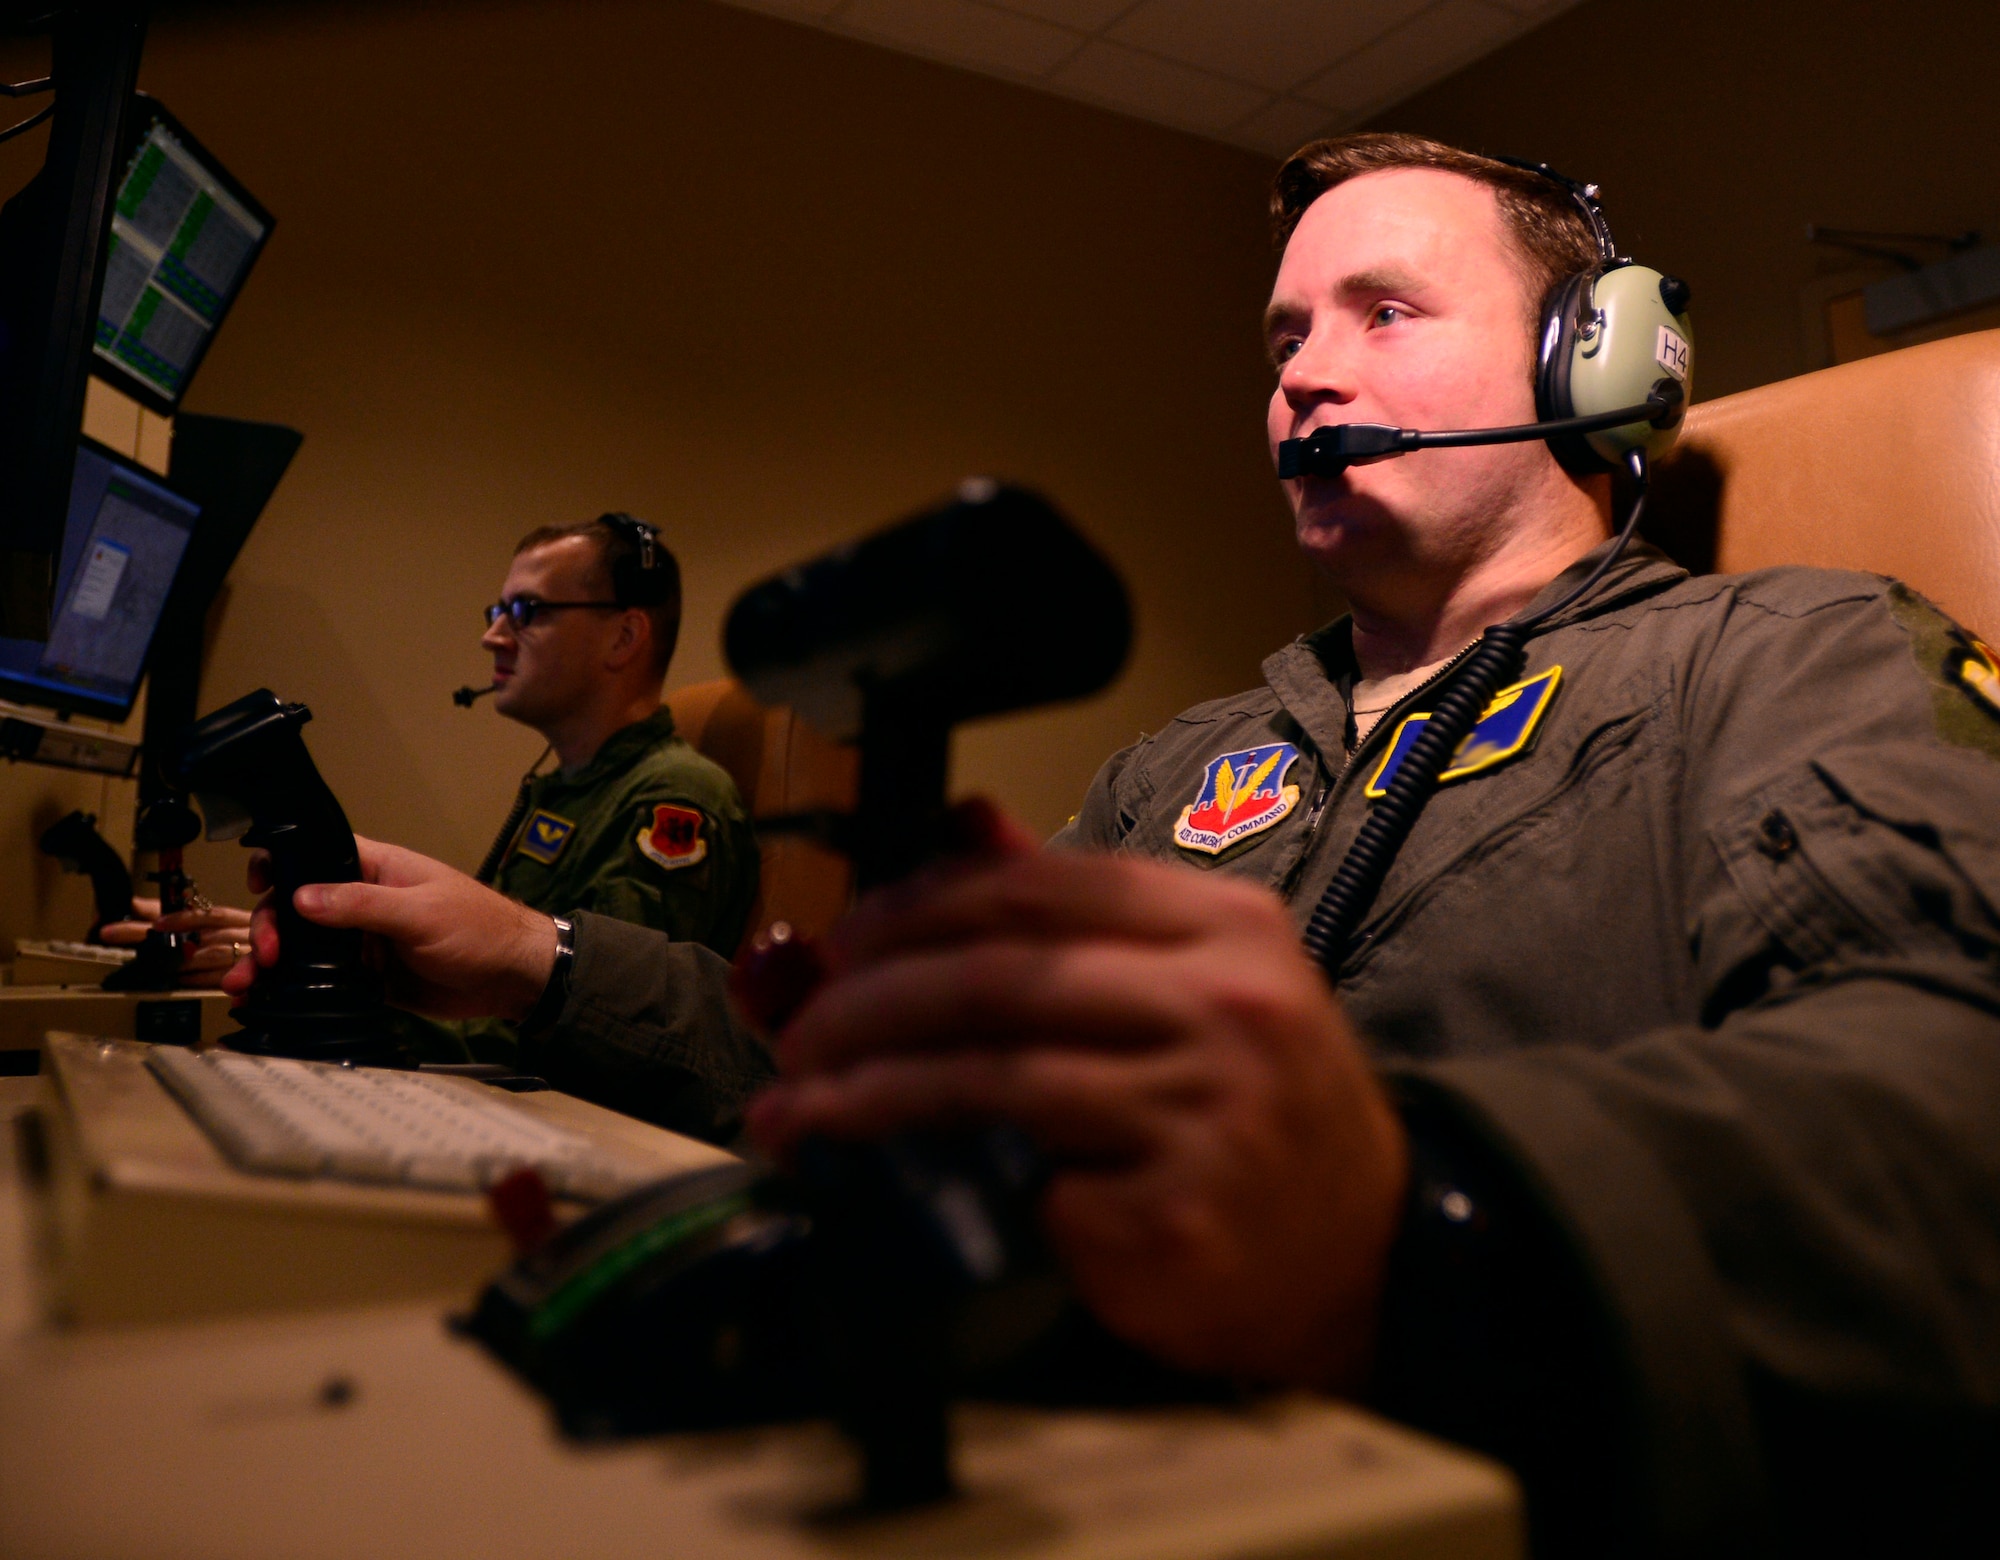 Capt. Jonathan, 432nd Wing pilot, right, and Staff Sgt. Matthew, 432nd WG sensor operator, left, fly a training mission Oct. 13, 2015, at Creech Air Force Base, Nevada. The 432nd Wing conducted 189 weapon strikes in July of 2015 and 249 in August, setting a record for the number of strikes in a month in support of Operation Inherent Resolve. (U.S. Air Force photo by Airman 1st Class Christian Clausen/released)